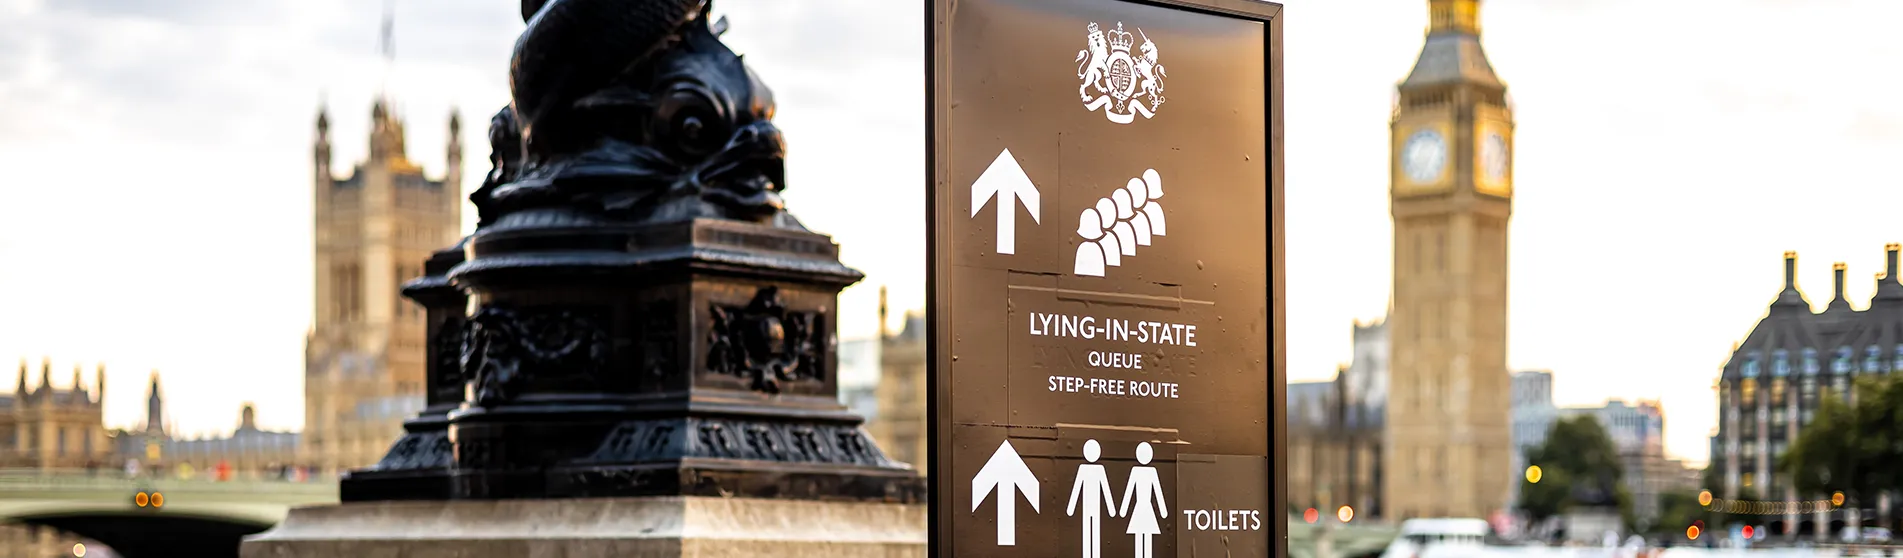 Sign for the Queen's lying in state queue with the Houses of Parliament in the background